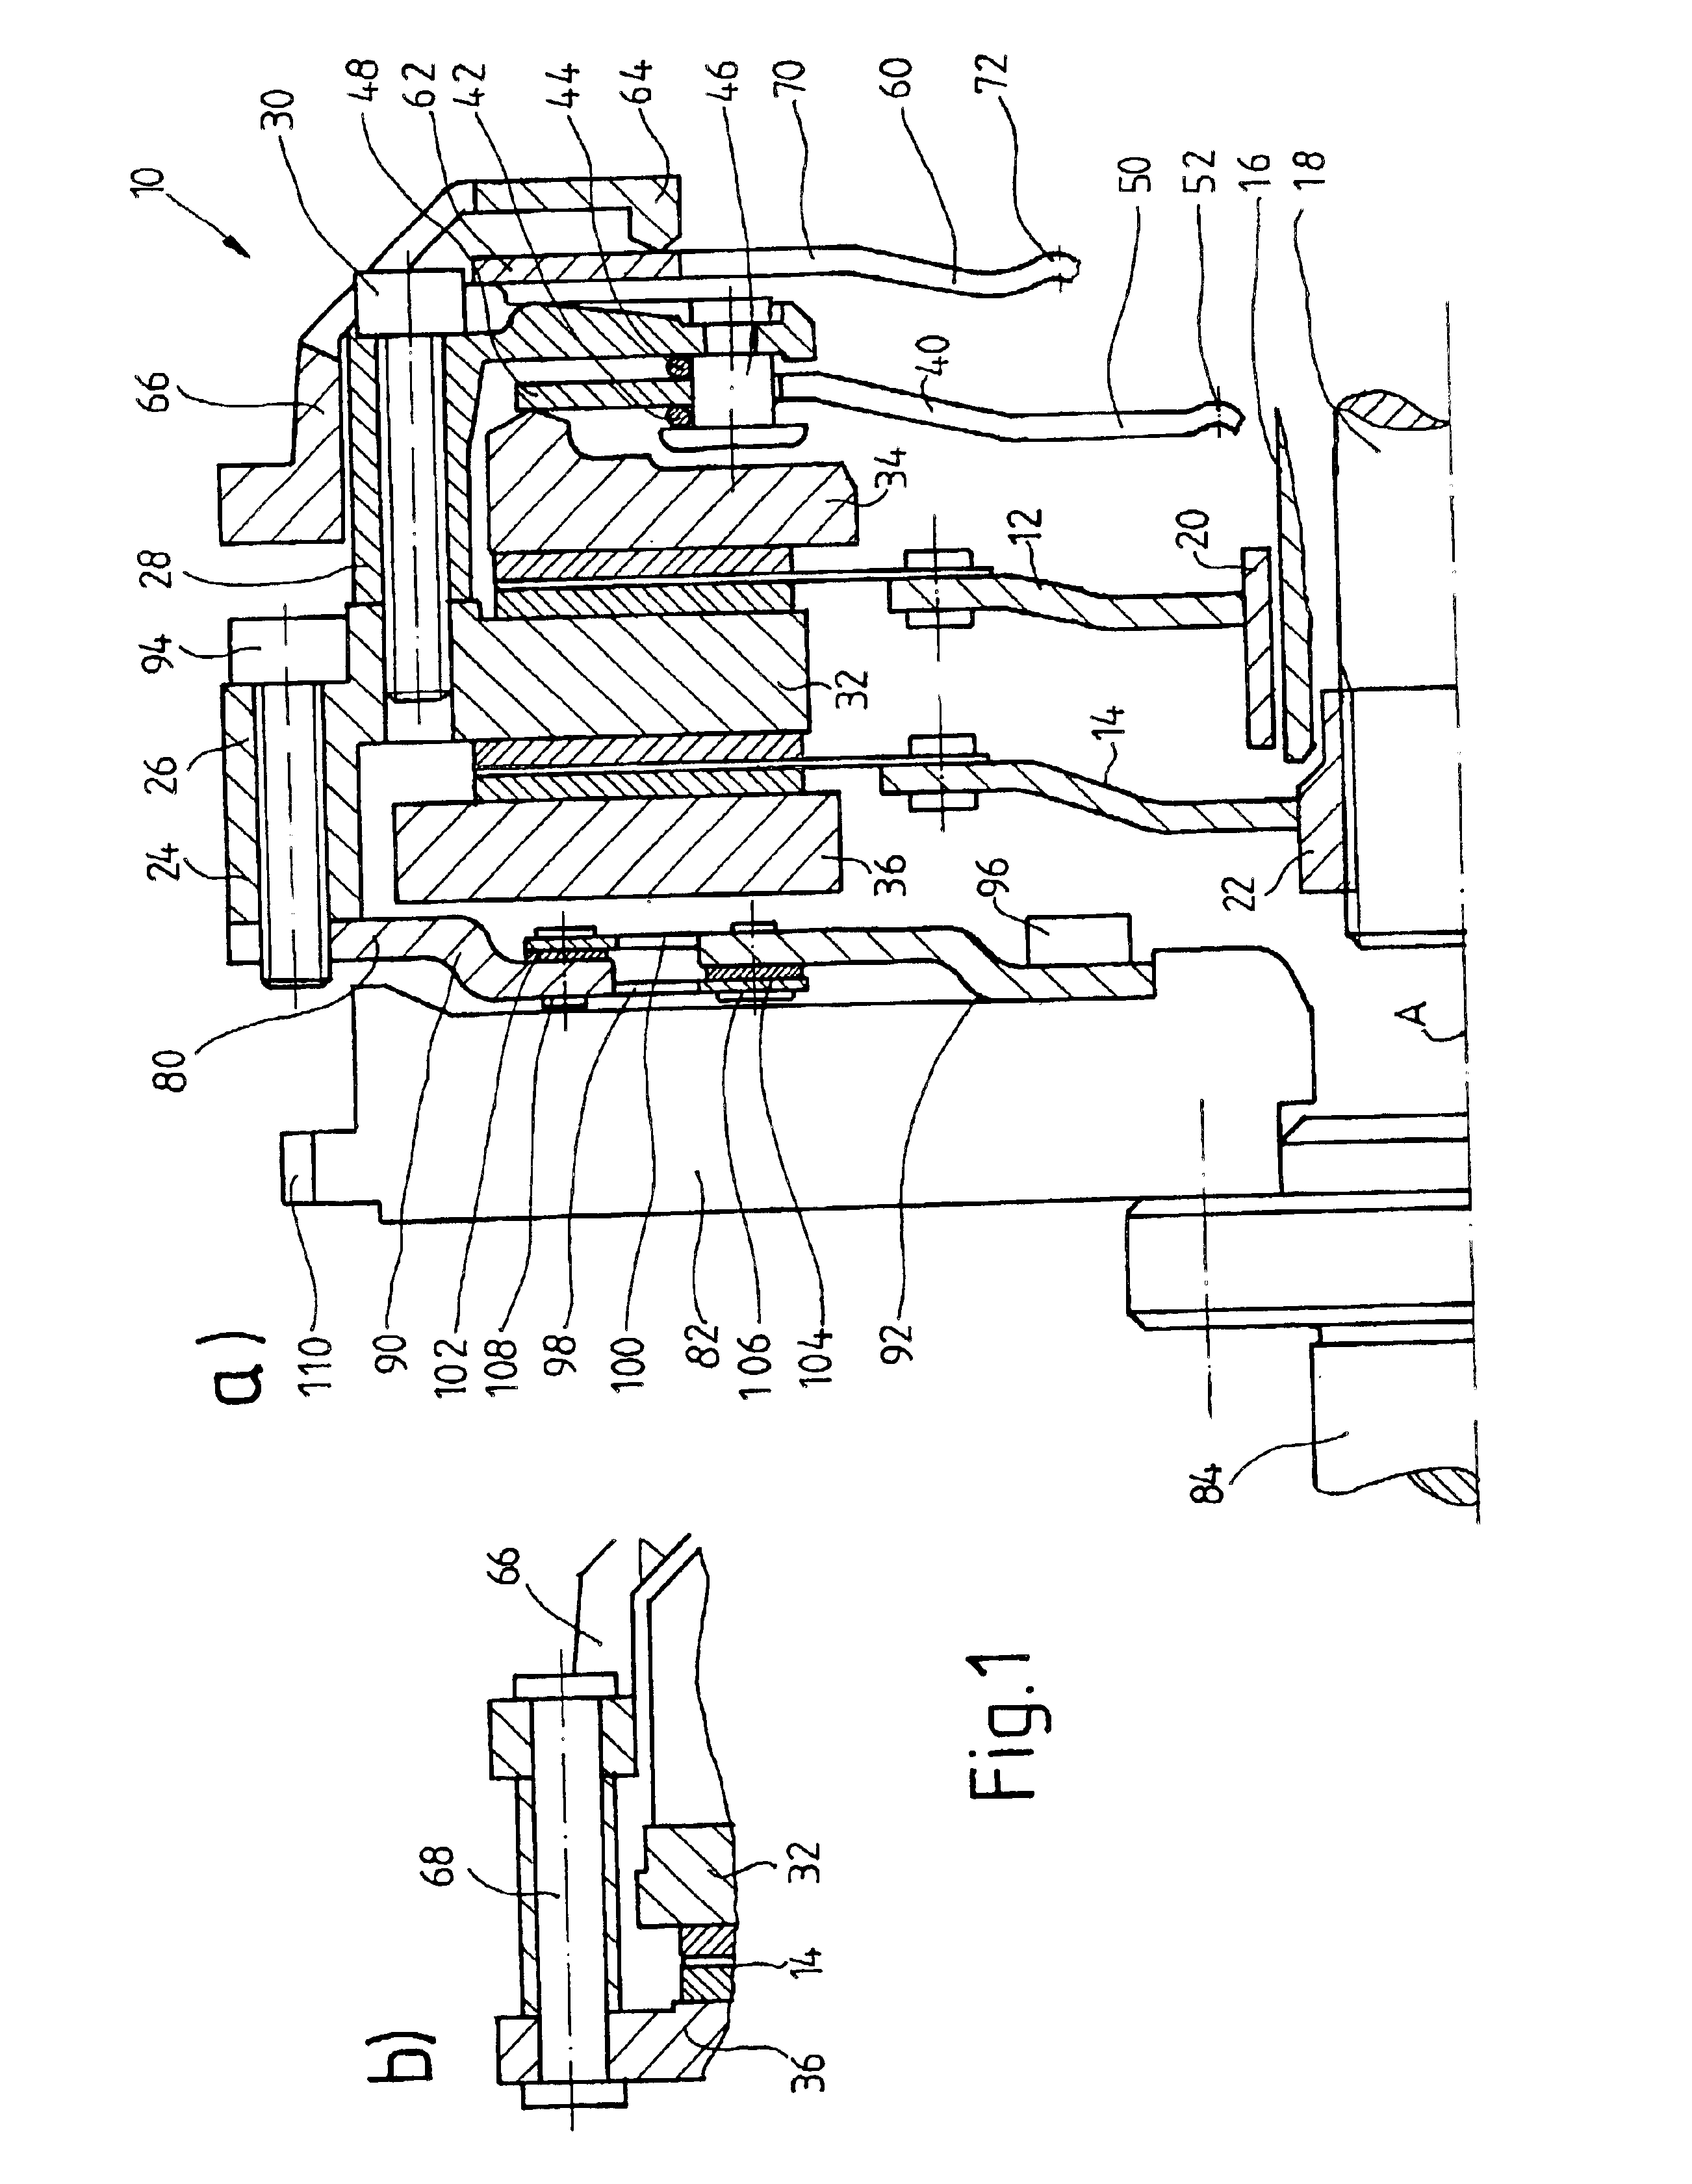 Clutch device connected centrally on the input side to a rotating shaft or rotating component in a motor vehicle drive train